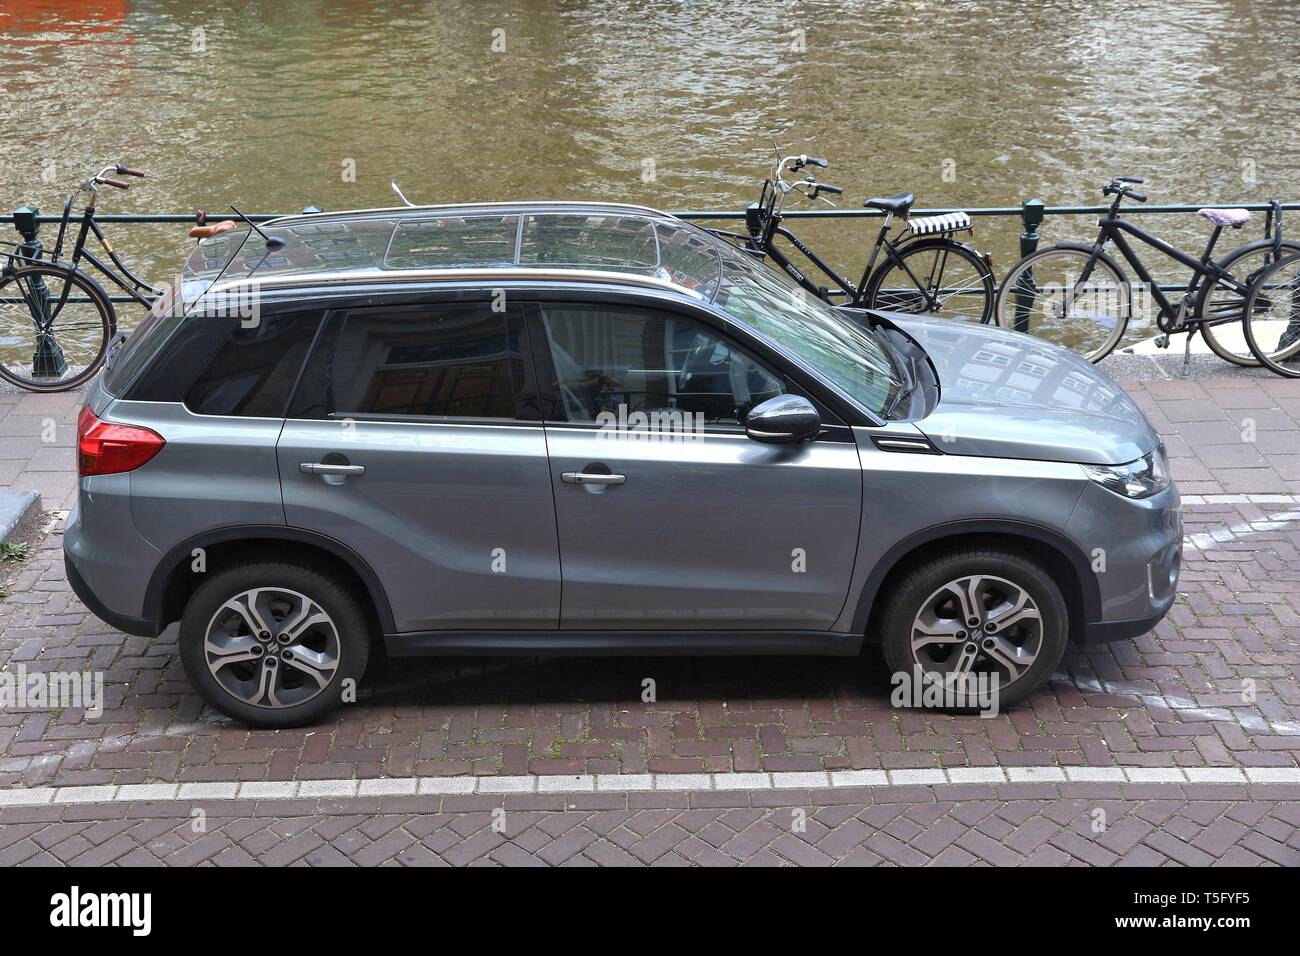 AMSTERDAM, NETHERLANDS - JULY 10, 2017: Silver Suzuki Grand Vitara SUV parked by the canal in Amsterdam. Netherlands has 528 registered cars per 1,000 Stock Photo